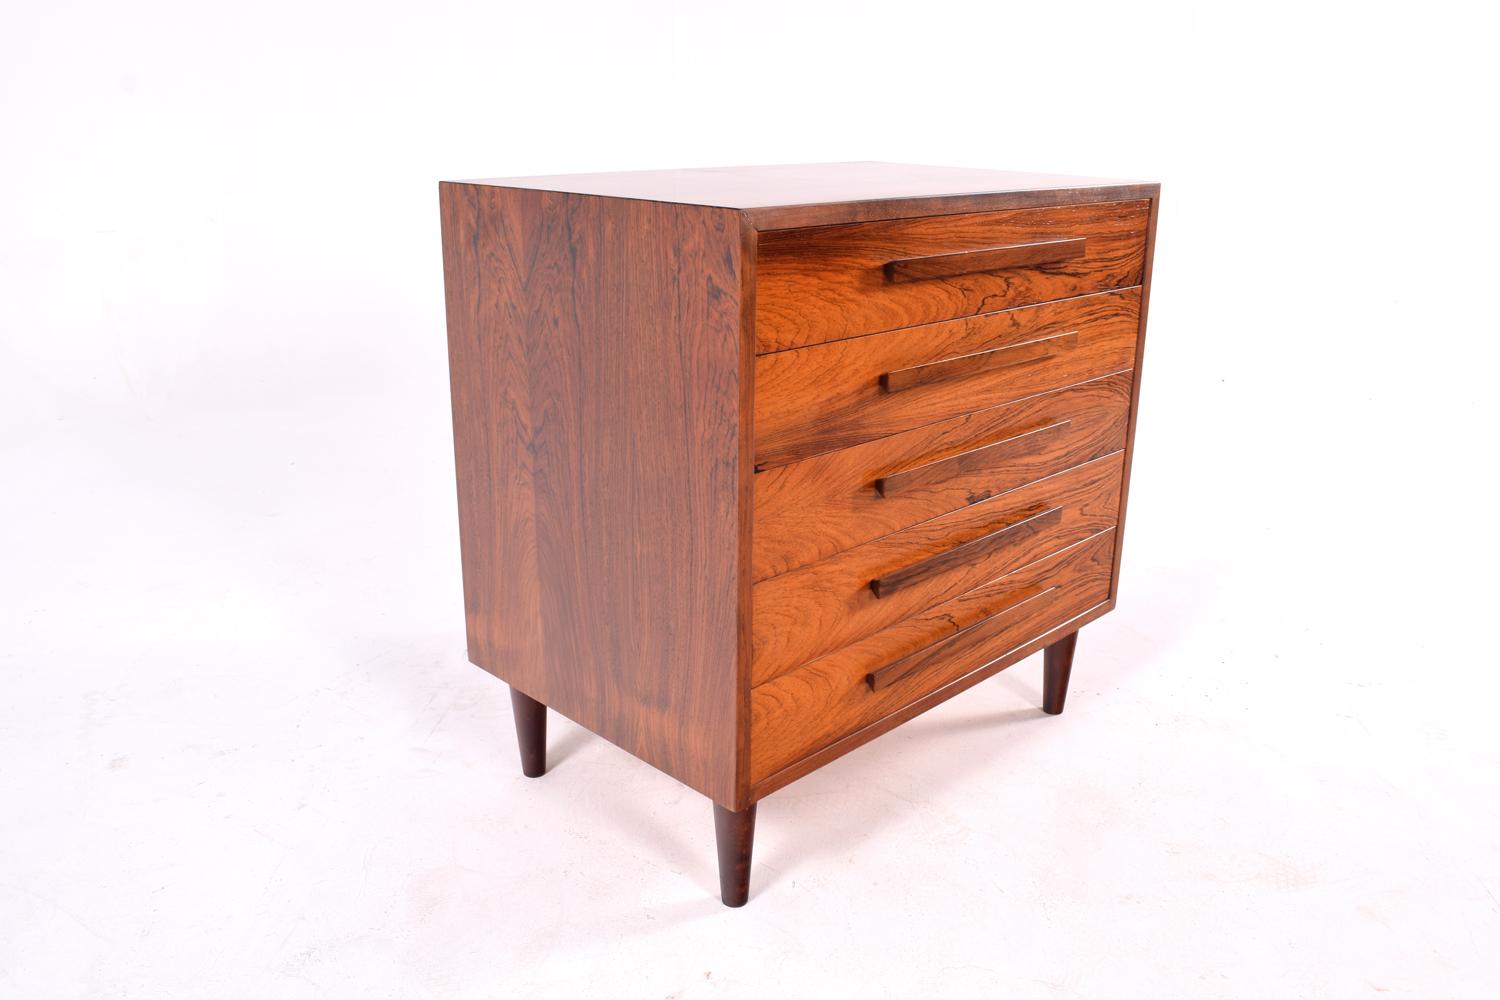 Exquisite 1960s rosewood chest of drawers with five drawers in bookmatched rosewood veneer.